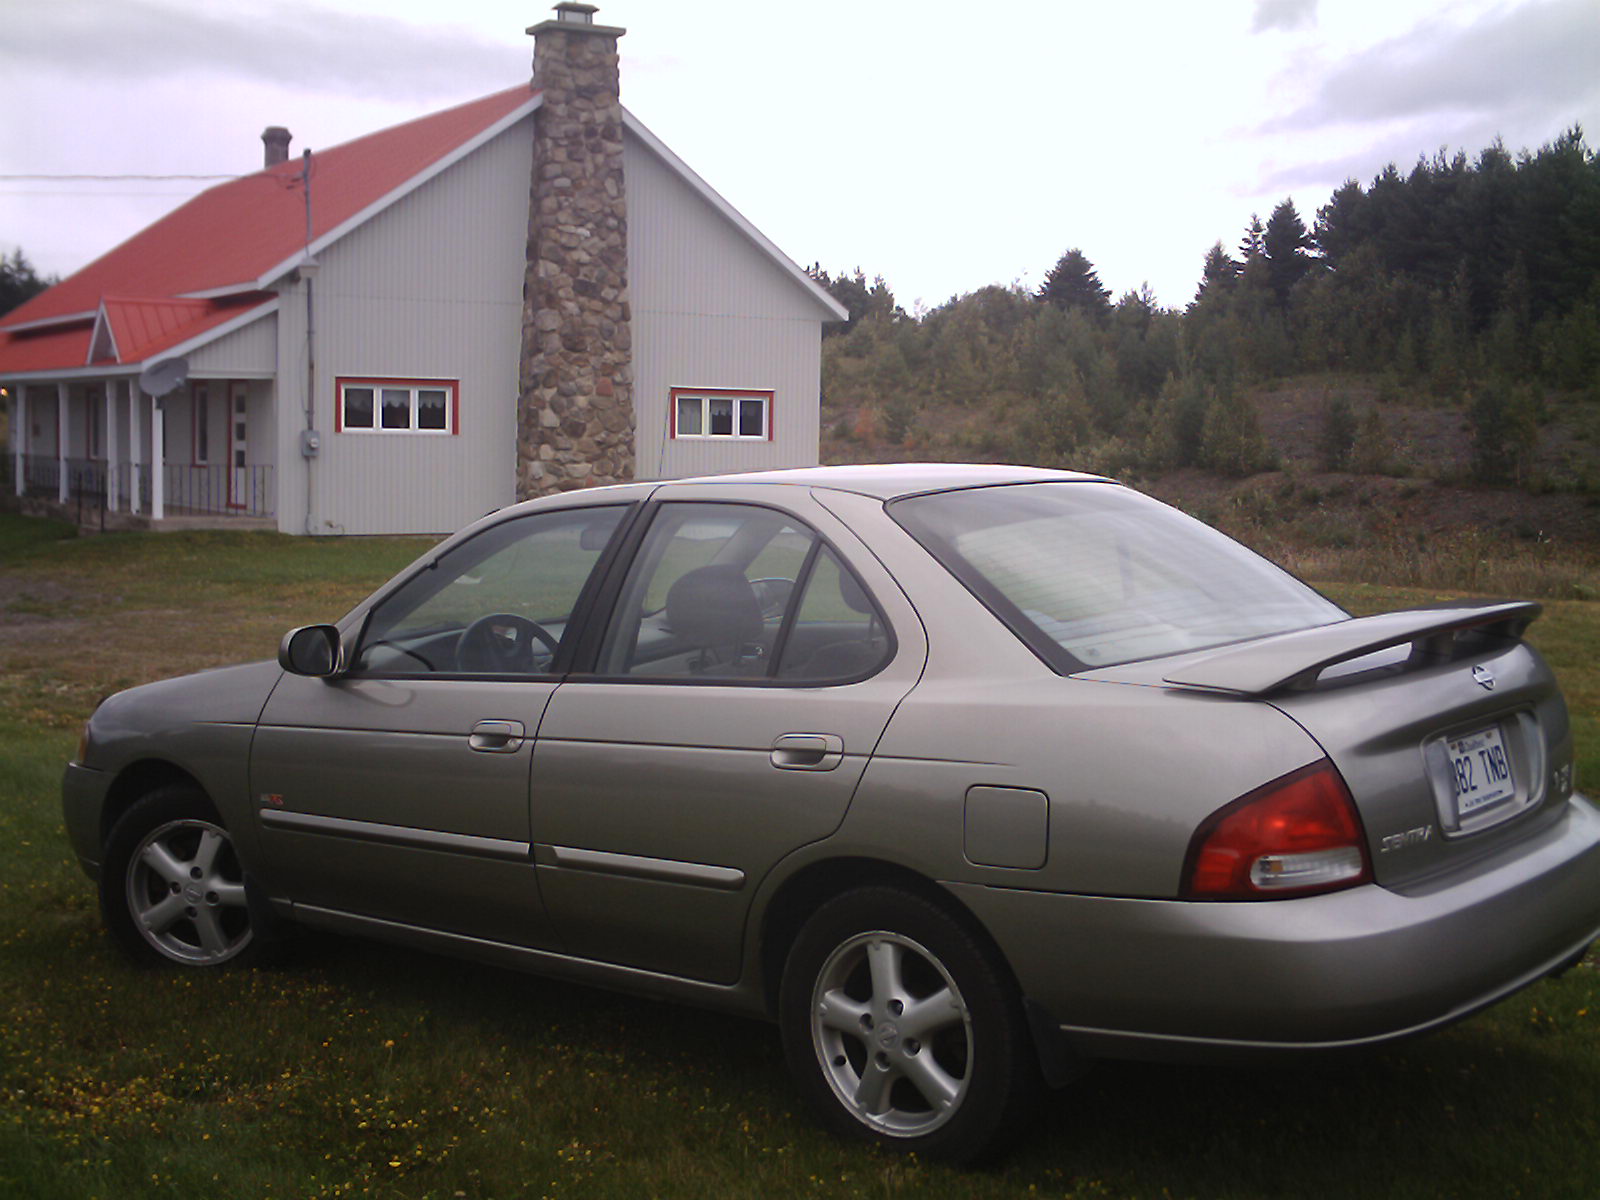 2001 Nissan sentra reliability ratings #5